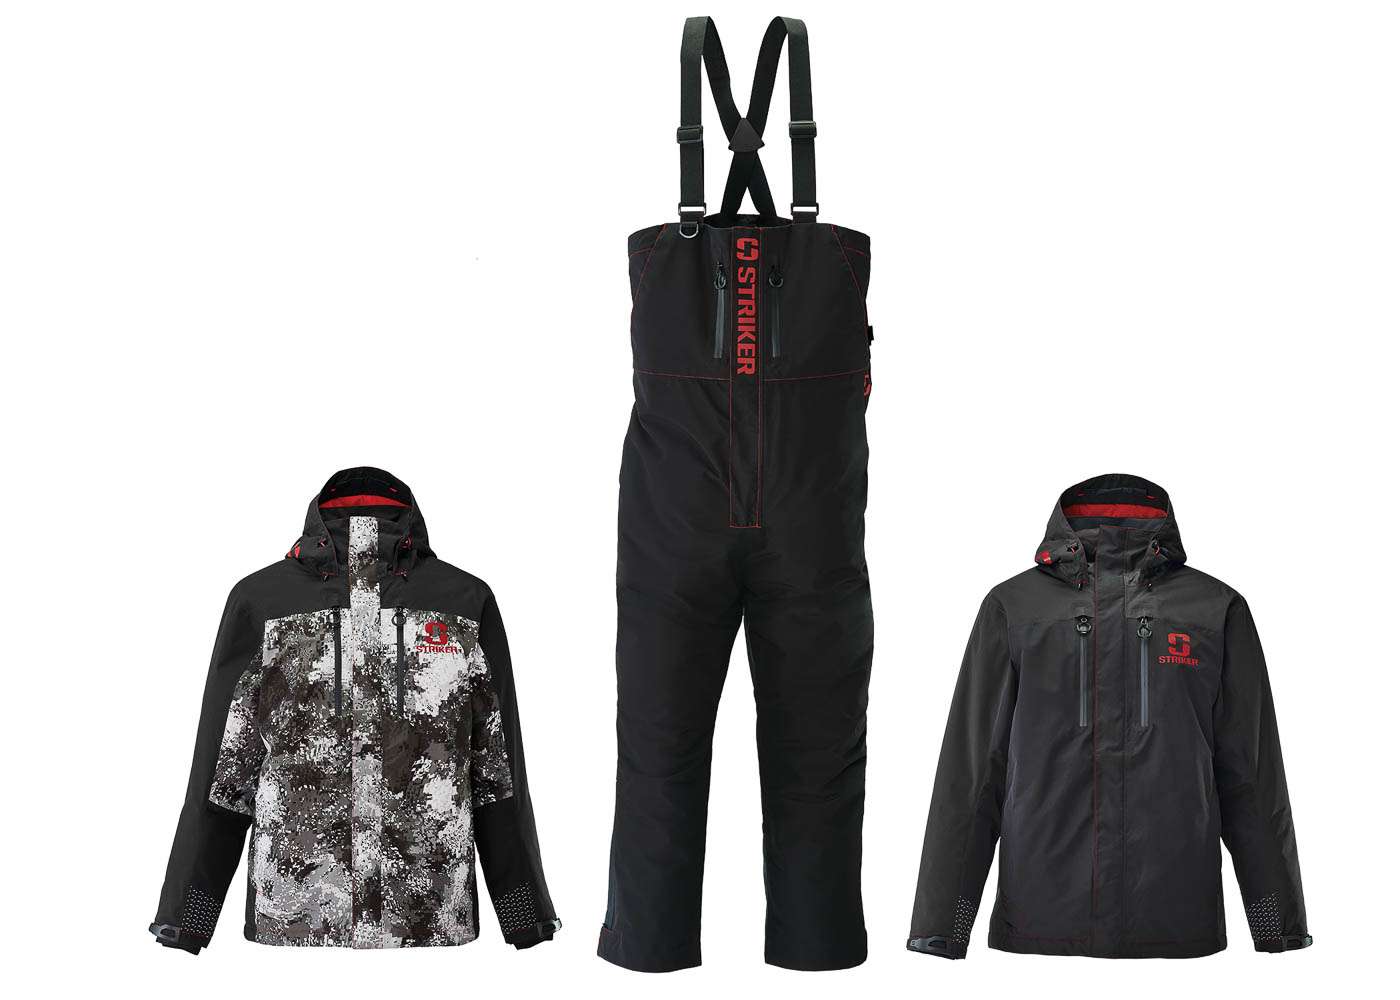 <p><strong>Striker Denali Insulated Rain Suit</strong></p><p>The Denal features body-mapped Primaloft Silver insulation with a unique HeatMap reflective ceramic lining. The benefits are premium warmth without the bulk, allowing anglers freedom of movement. A Hydrapore Pro Waterproof 10,000mm/Breathable 10,000g rating provides a durable barrier of protection in wet or snowy conditions. A 3-point adjustable hood and internal neoprene cuffs lock out the elements completely in challenging conditions. Waist-high zippers and an adjustable waist cinch feature allow for custom fit, while preventing shoulder fatigue from fishing all day. Also available in tall and extended sizes. From $599.99, or $299.99 for the jacket; $299.99 for bib. <a href=